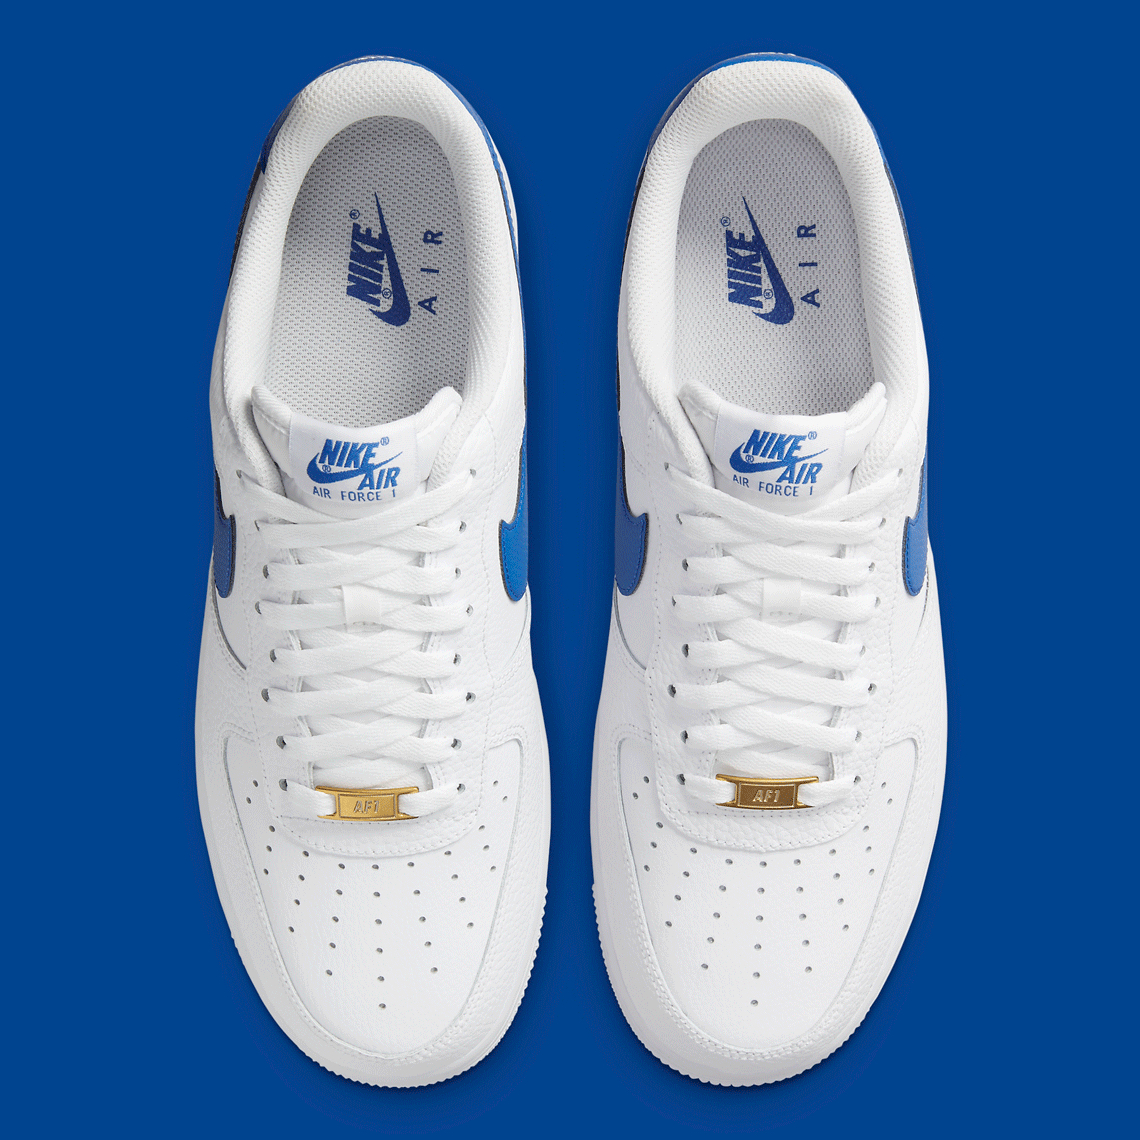 royal blue and white forces